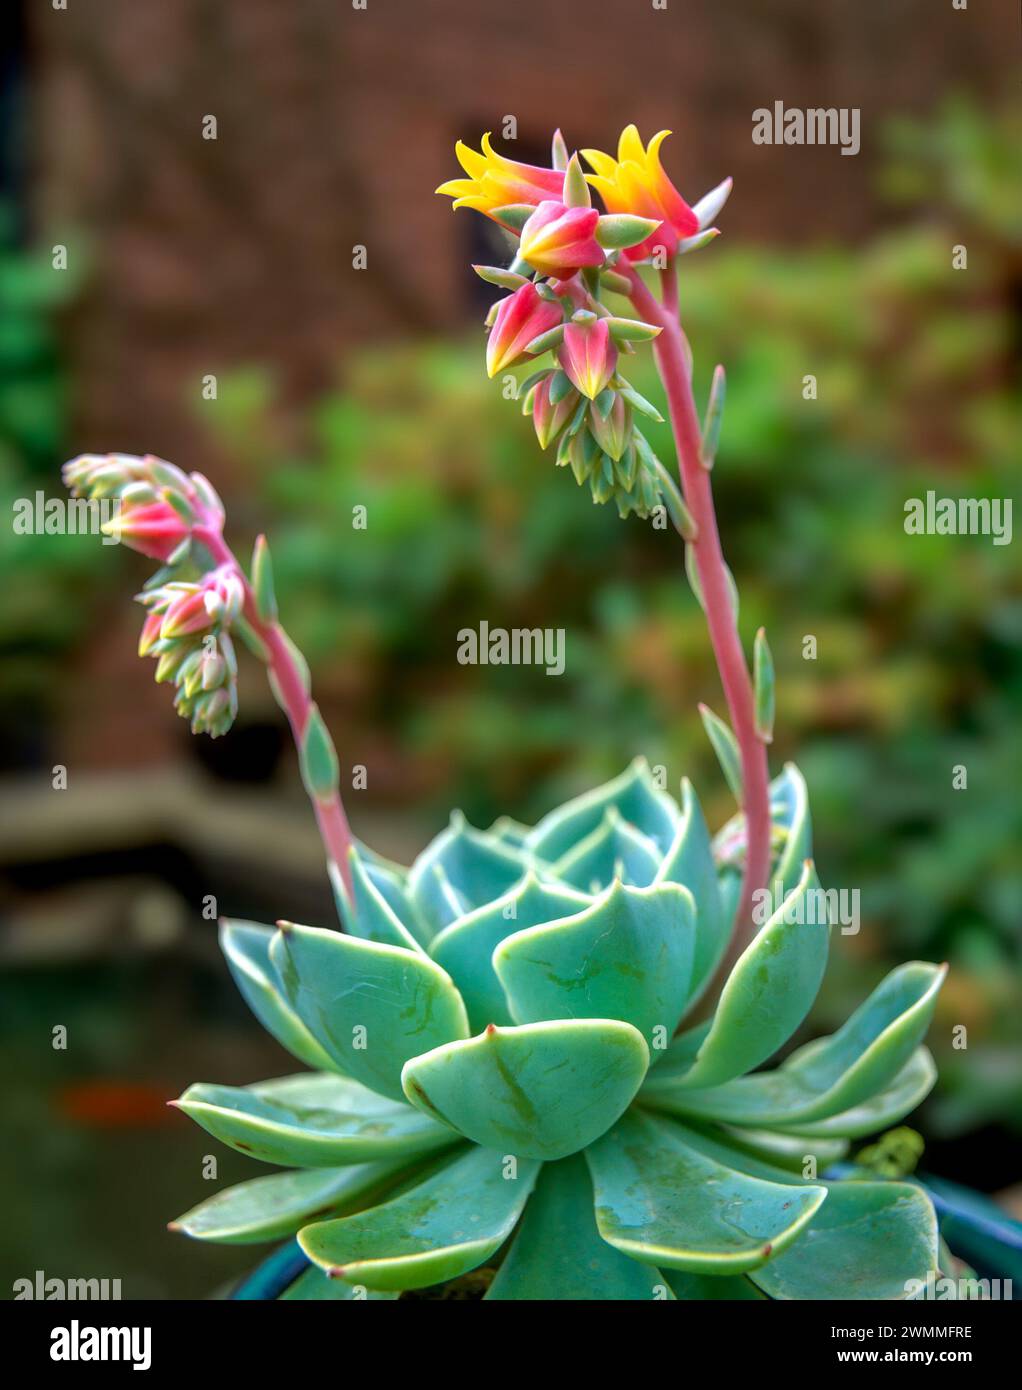 One blooming Echeveria elegans (Mexican snowball) succulent plant with orange and yellow flowers growing on stems above succulent green leaves in June Stock Photo